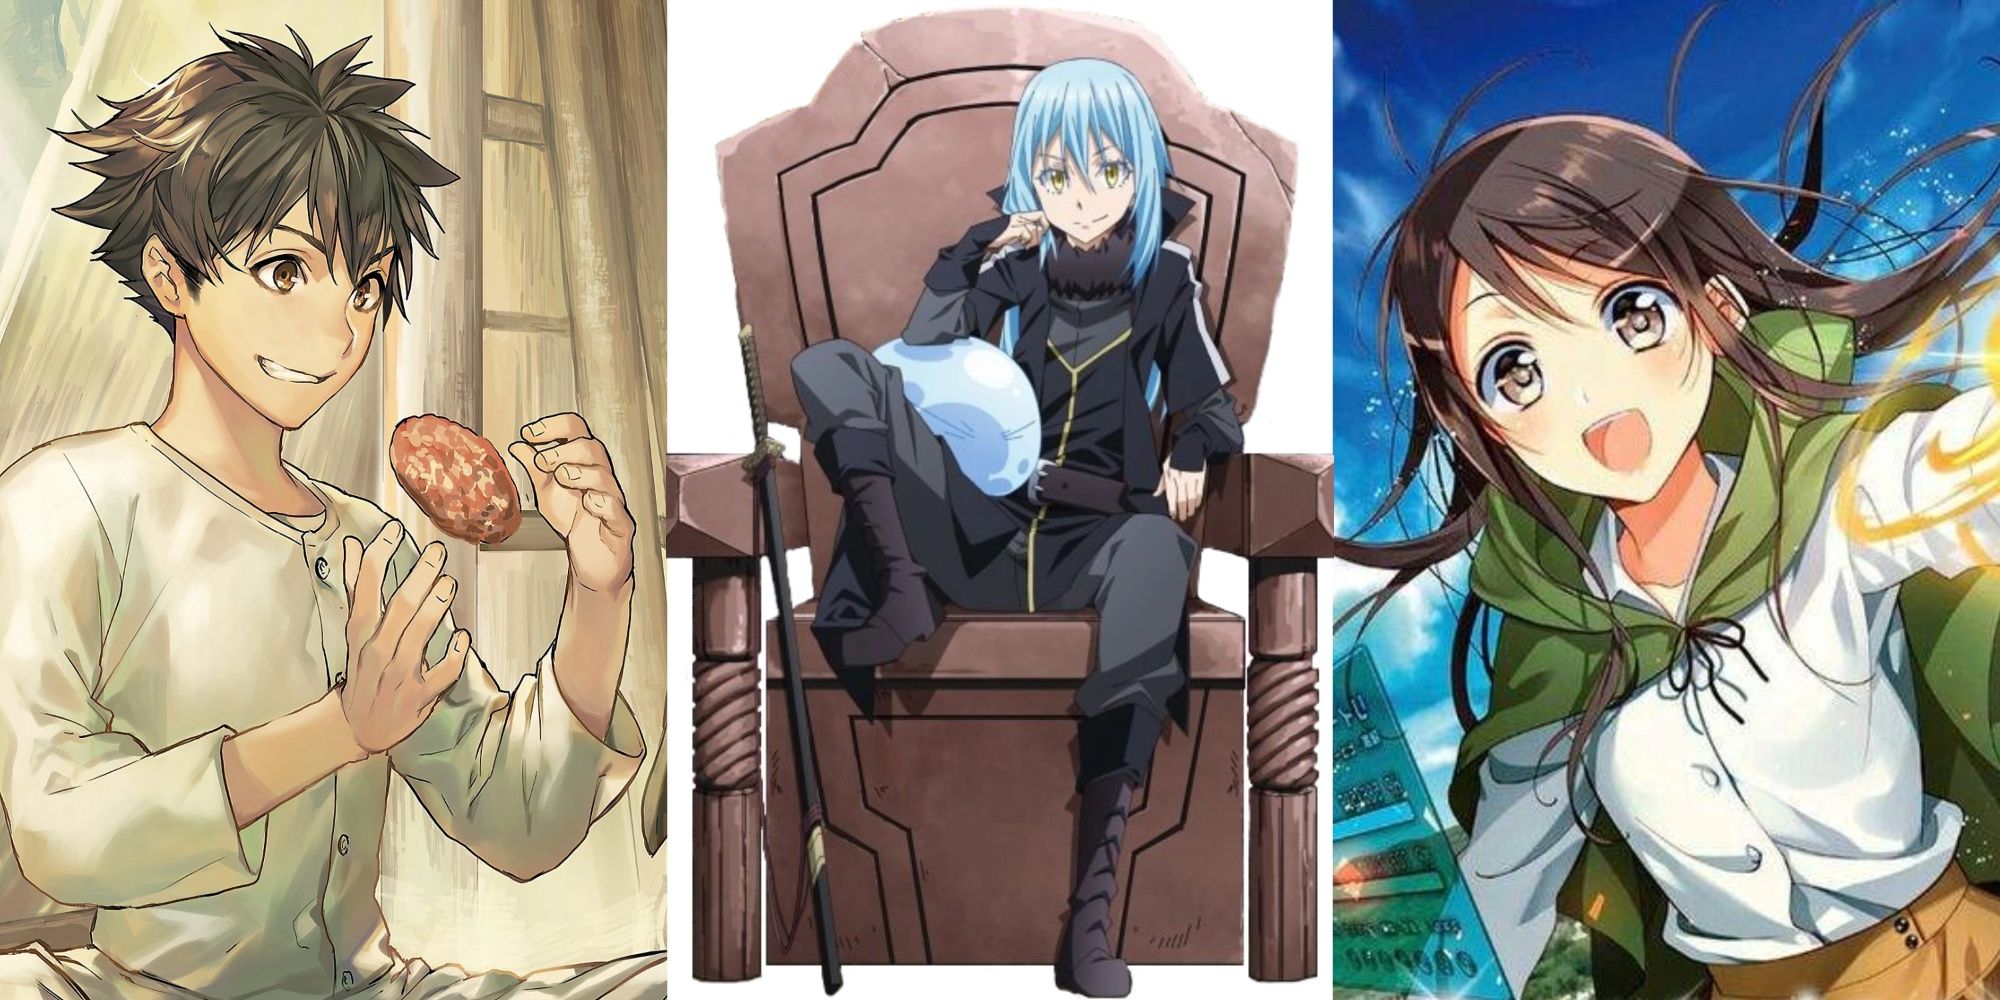 Best Isekai Anime & Manga Where The Protagonist Is An Inventor